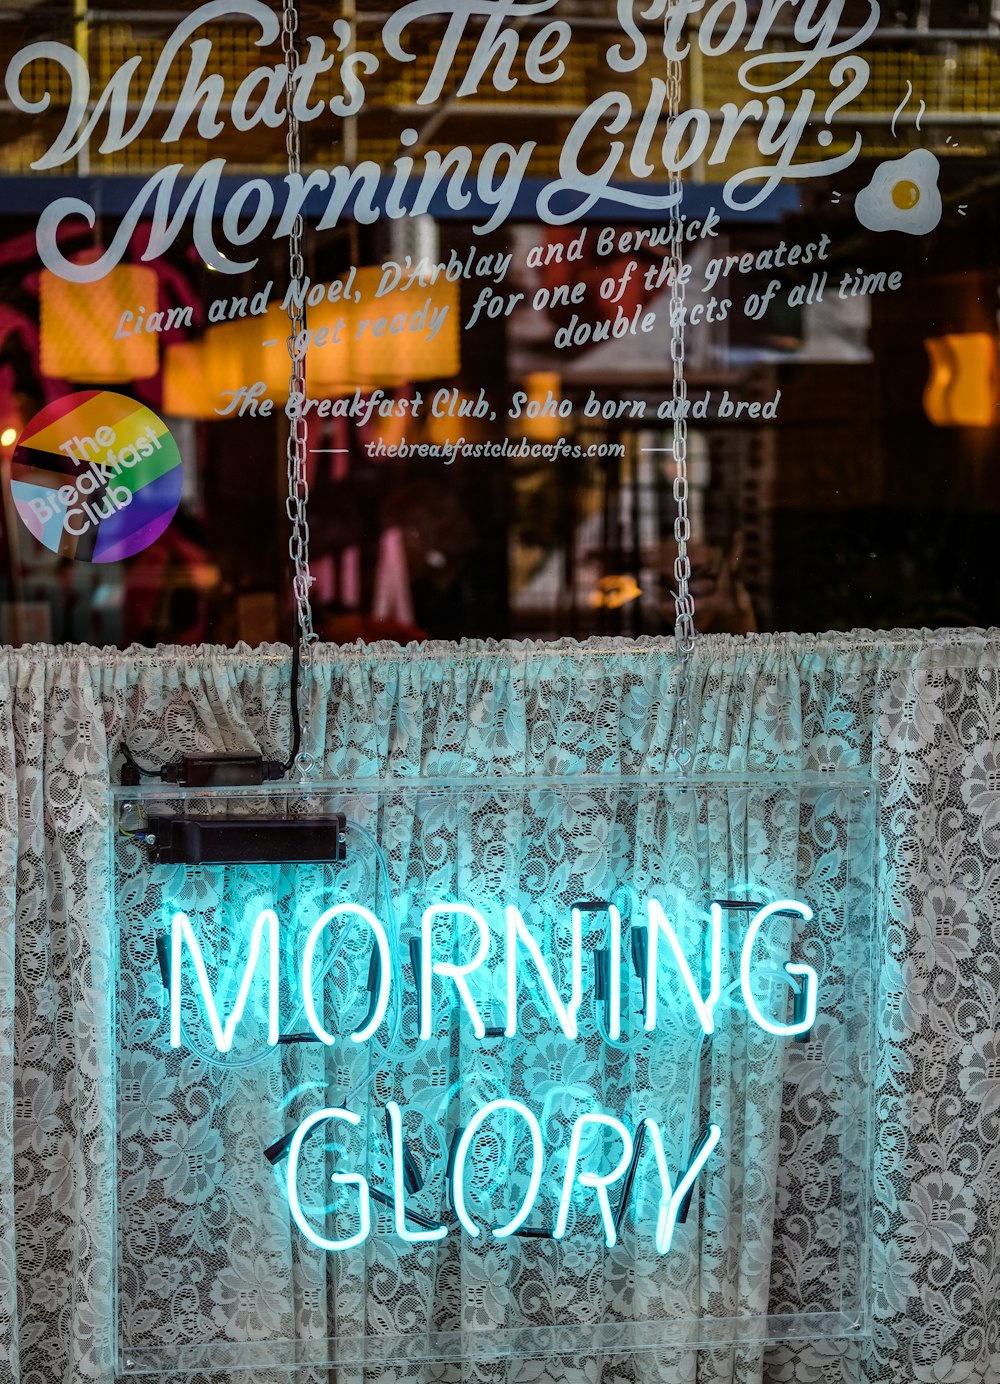 powered-on teal morning glory signage